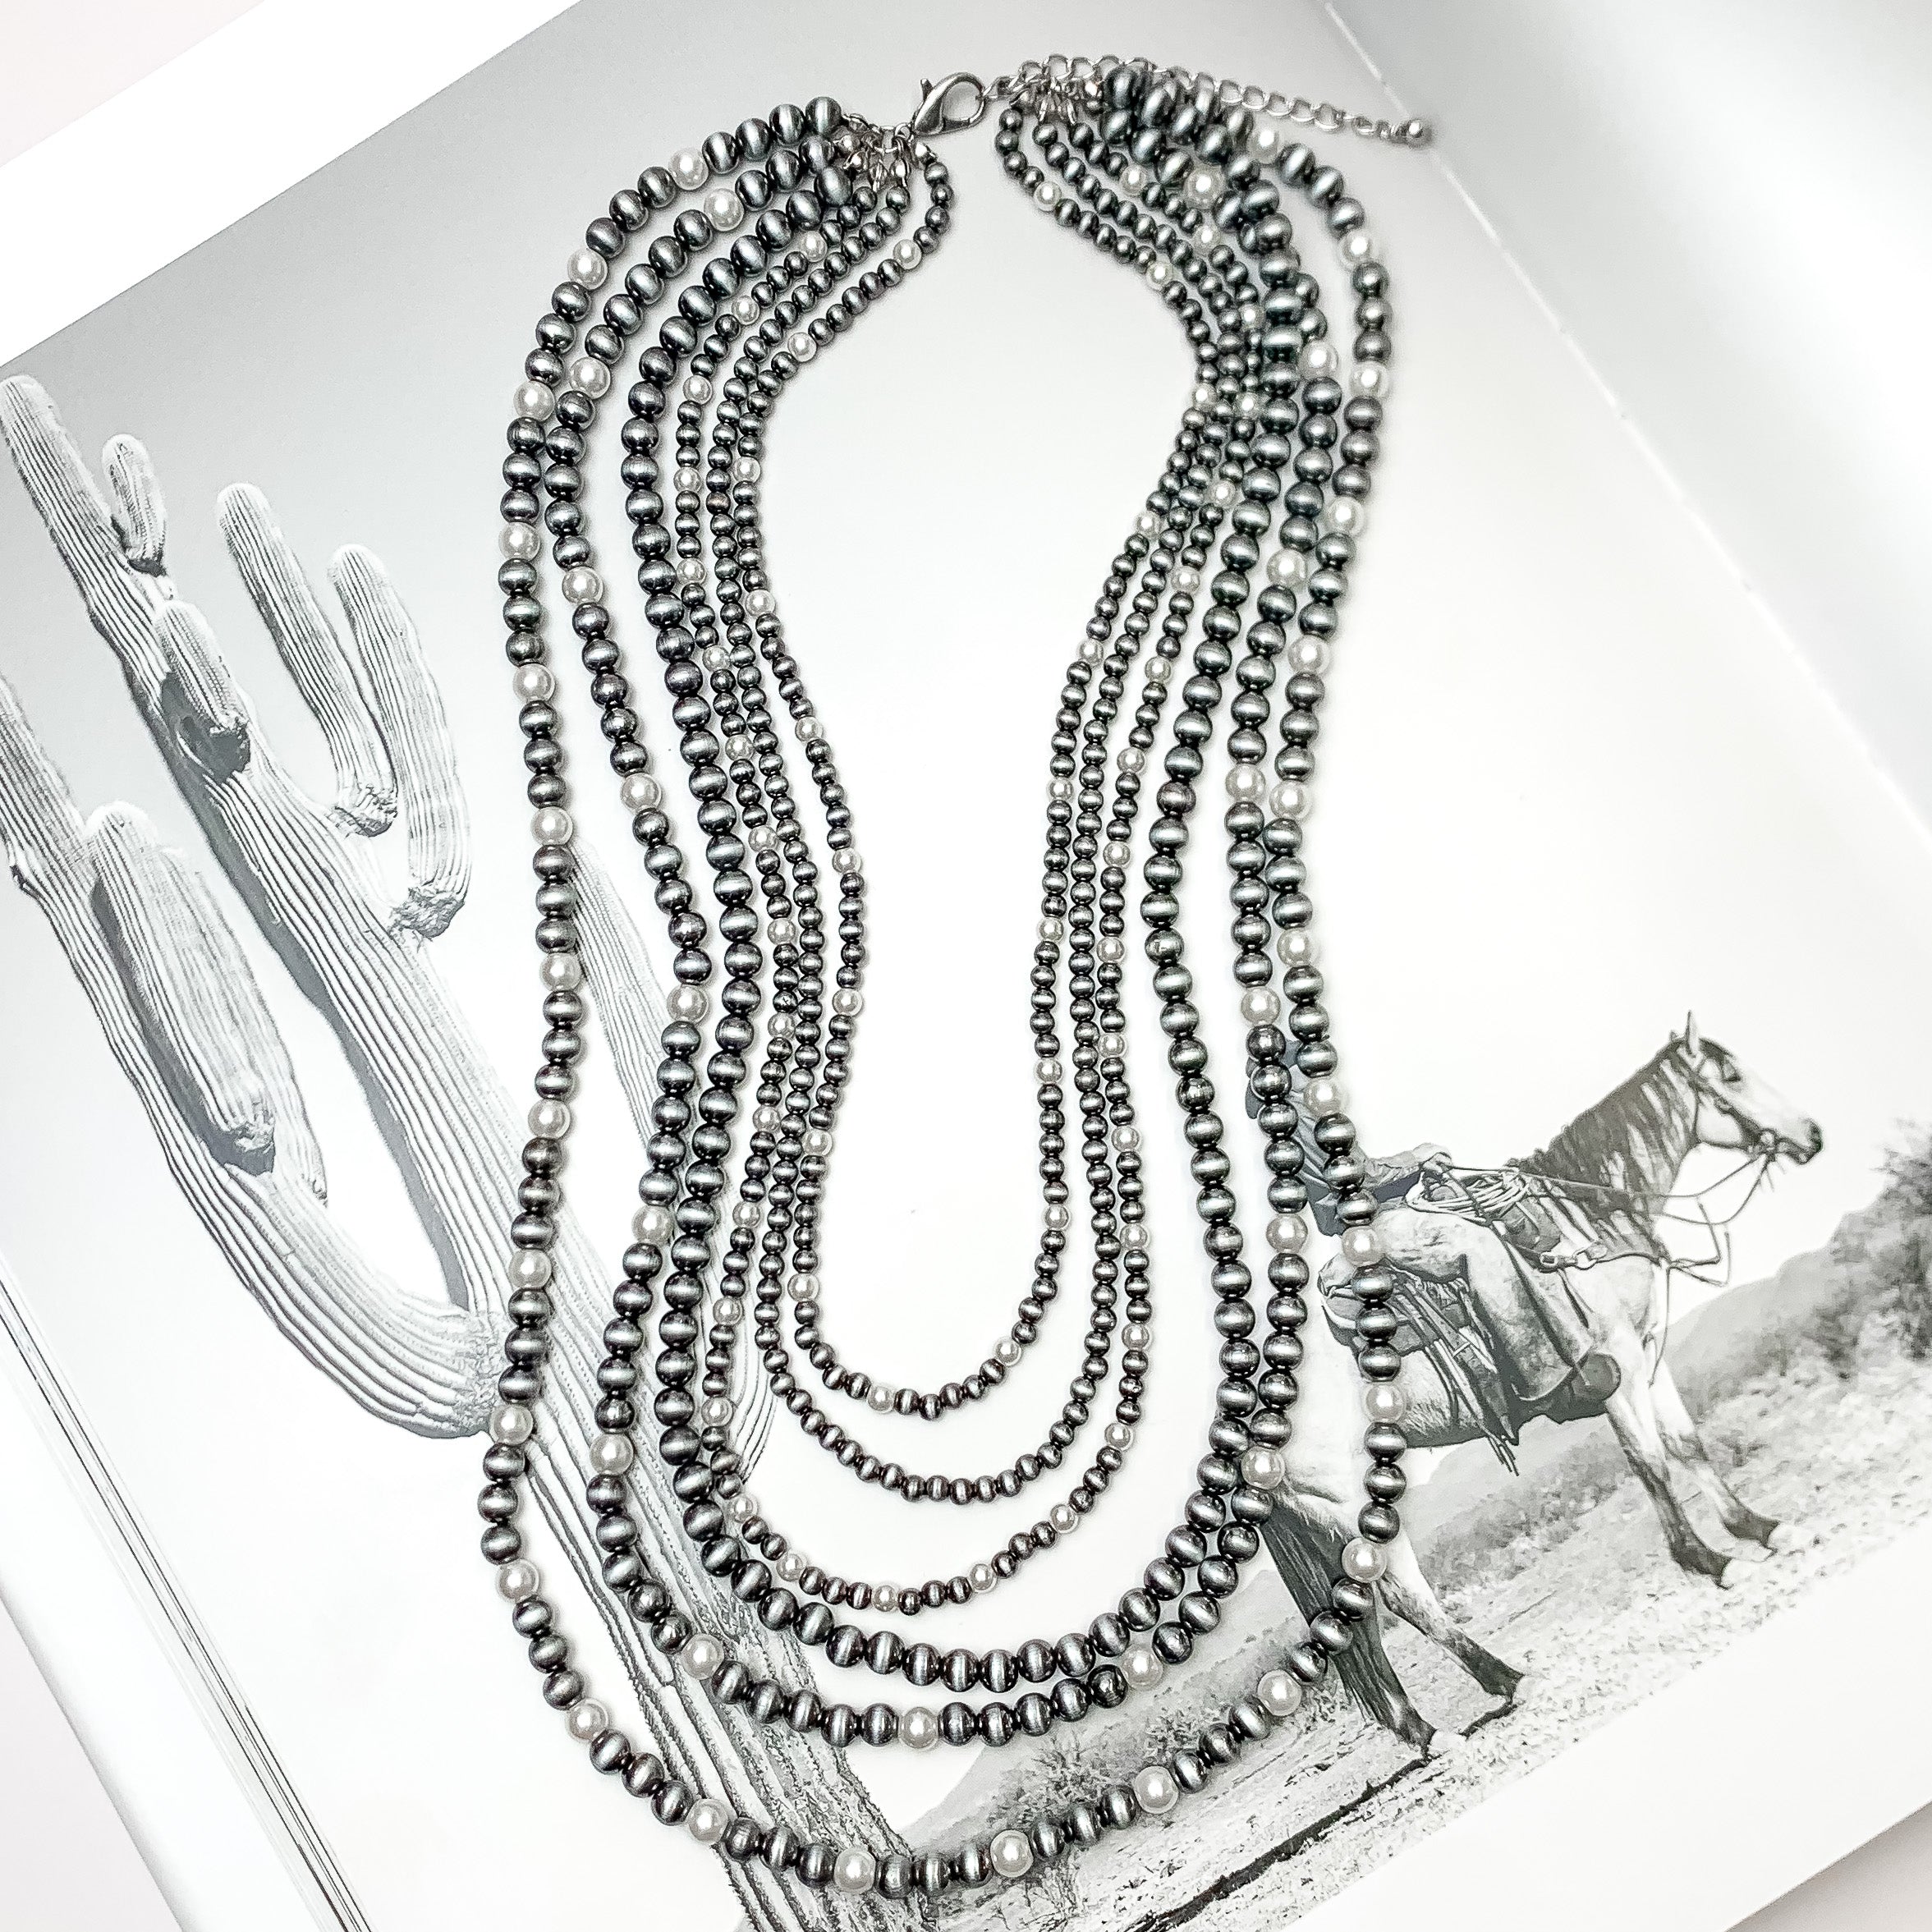 Six Strand Faux Navajo Pearl Necklace in Silver Tone with White Pearl Beads. Pictured on a western background.